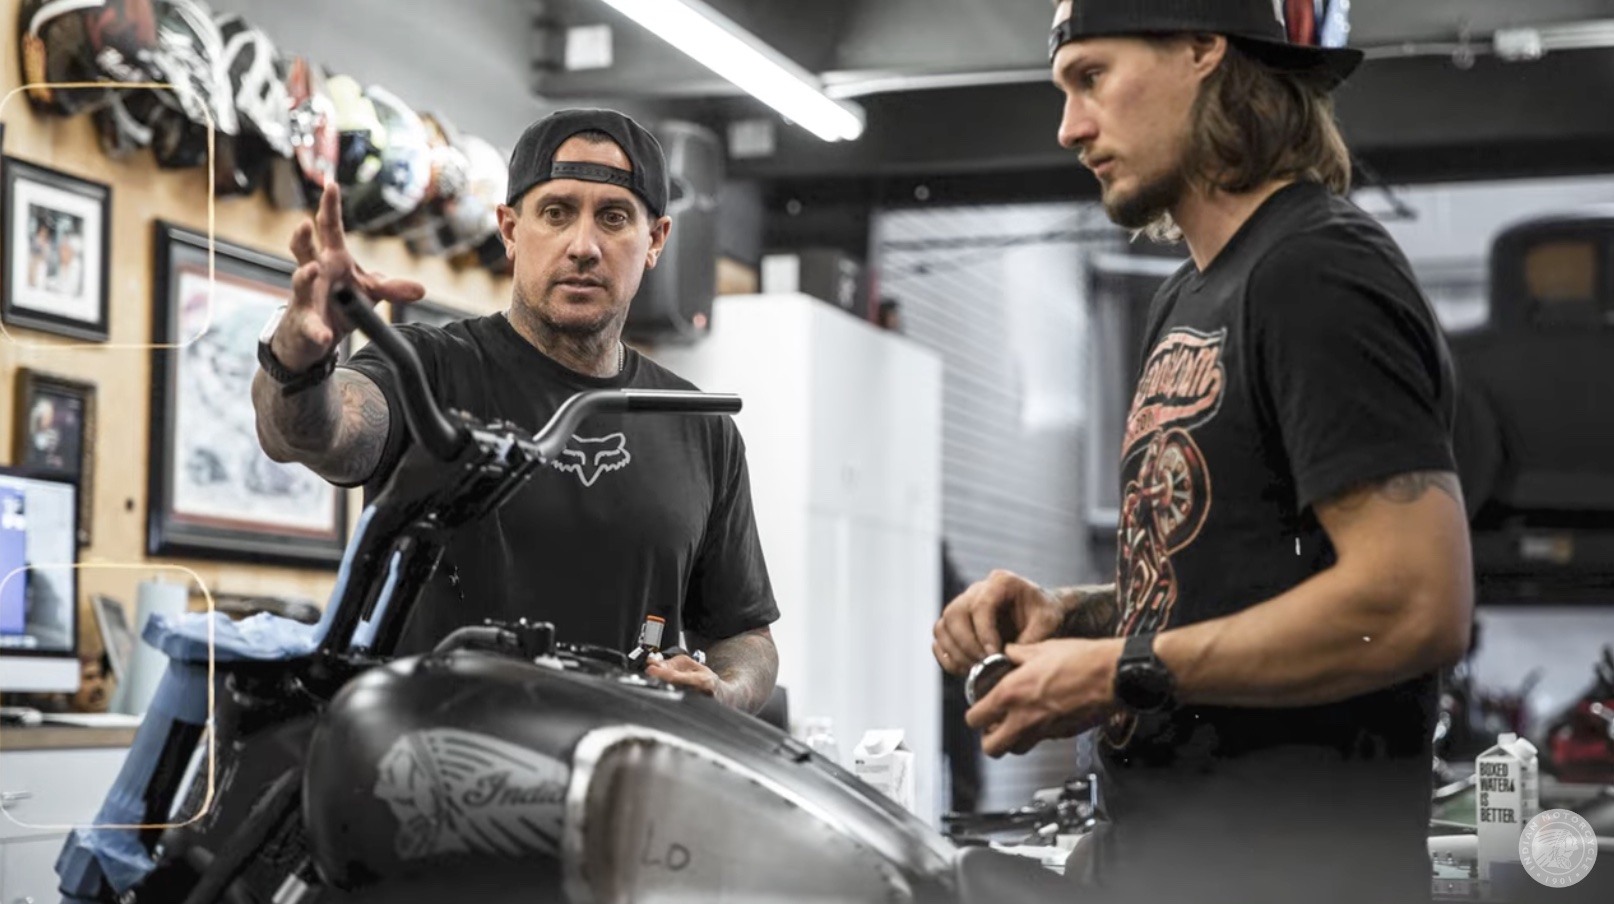 Carey Hart and Jake Cutler realizing a new variant of Indian's Sport Chief. Media sourced from Indian's press release.